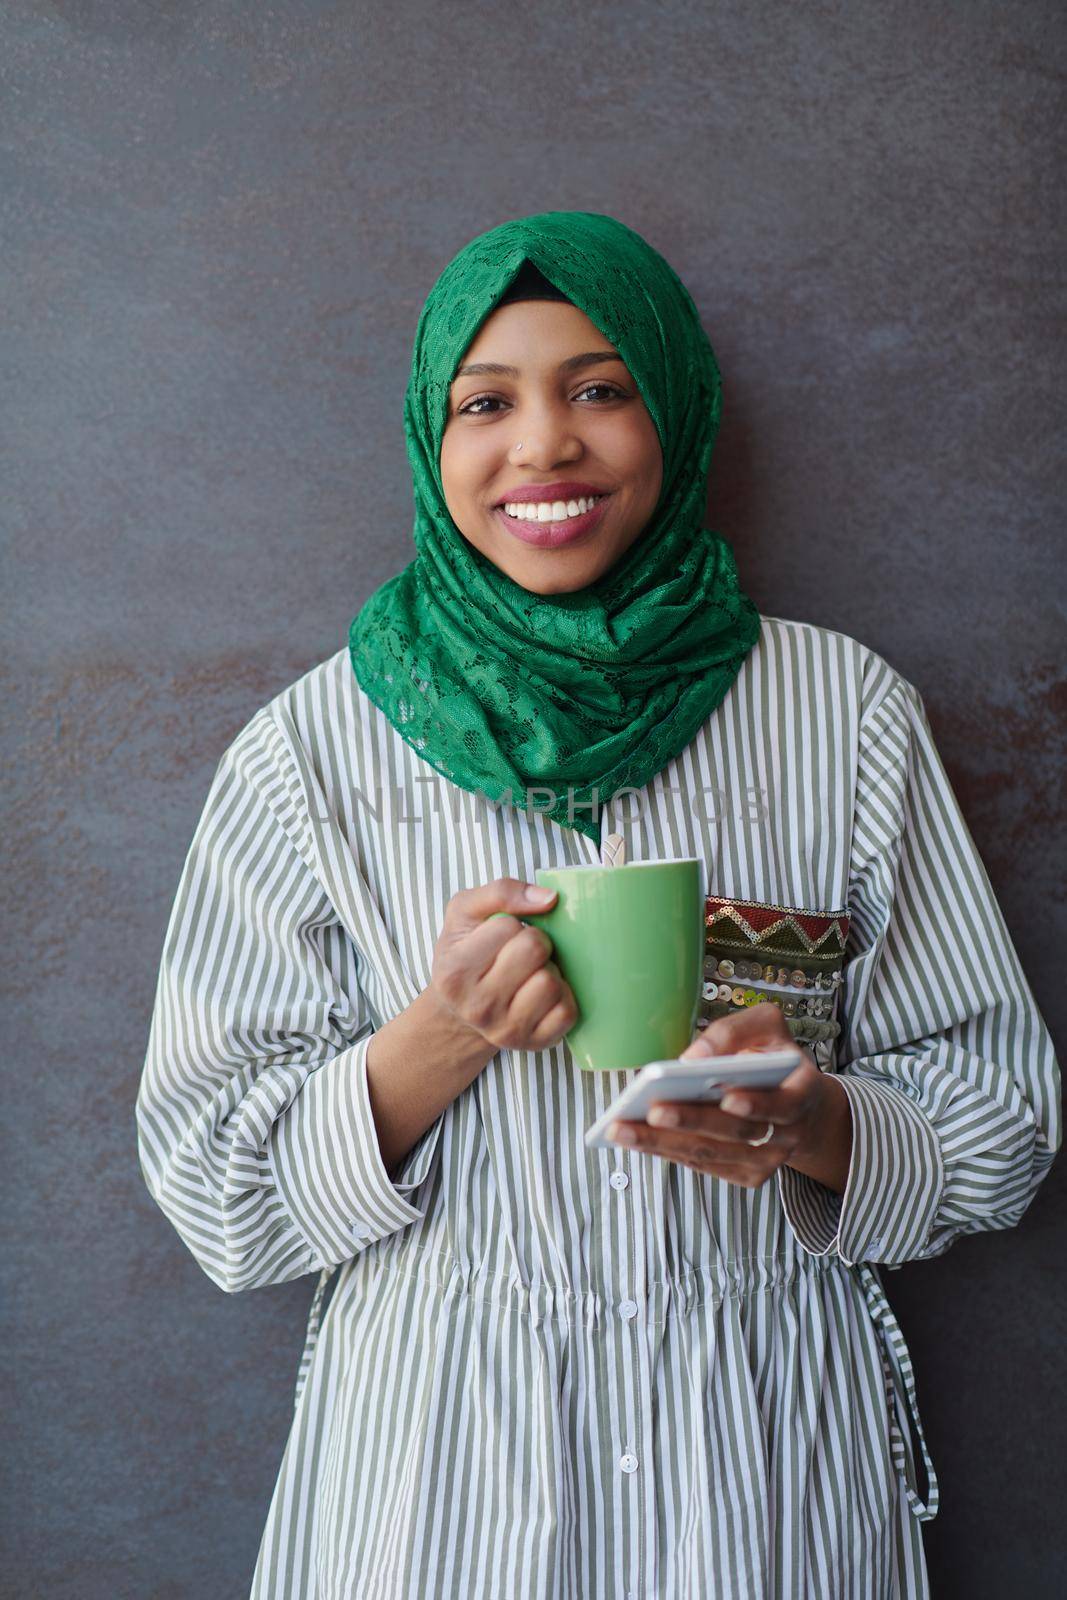 african muslim businesswoman with green hijab using mobile phone during coffee break from work in front of gray wall outside